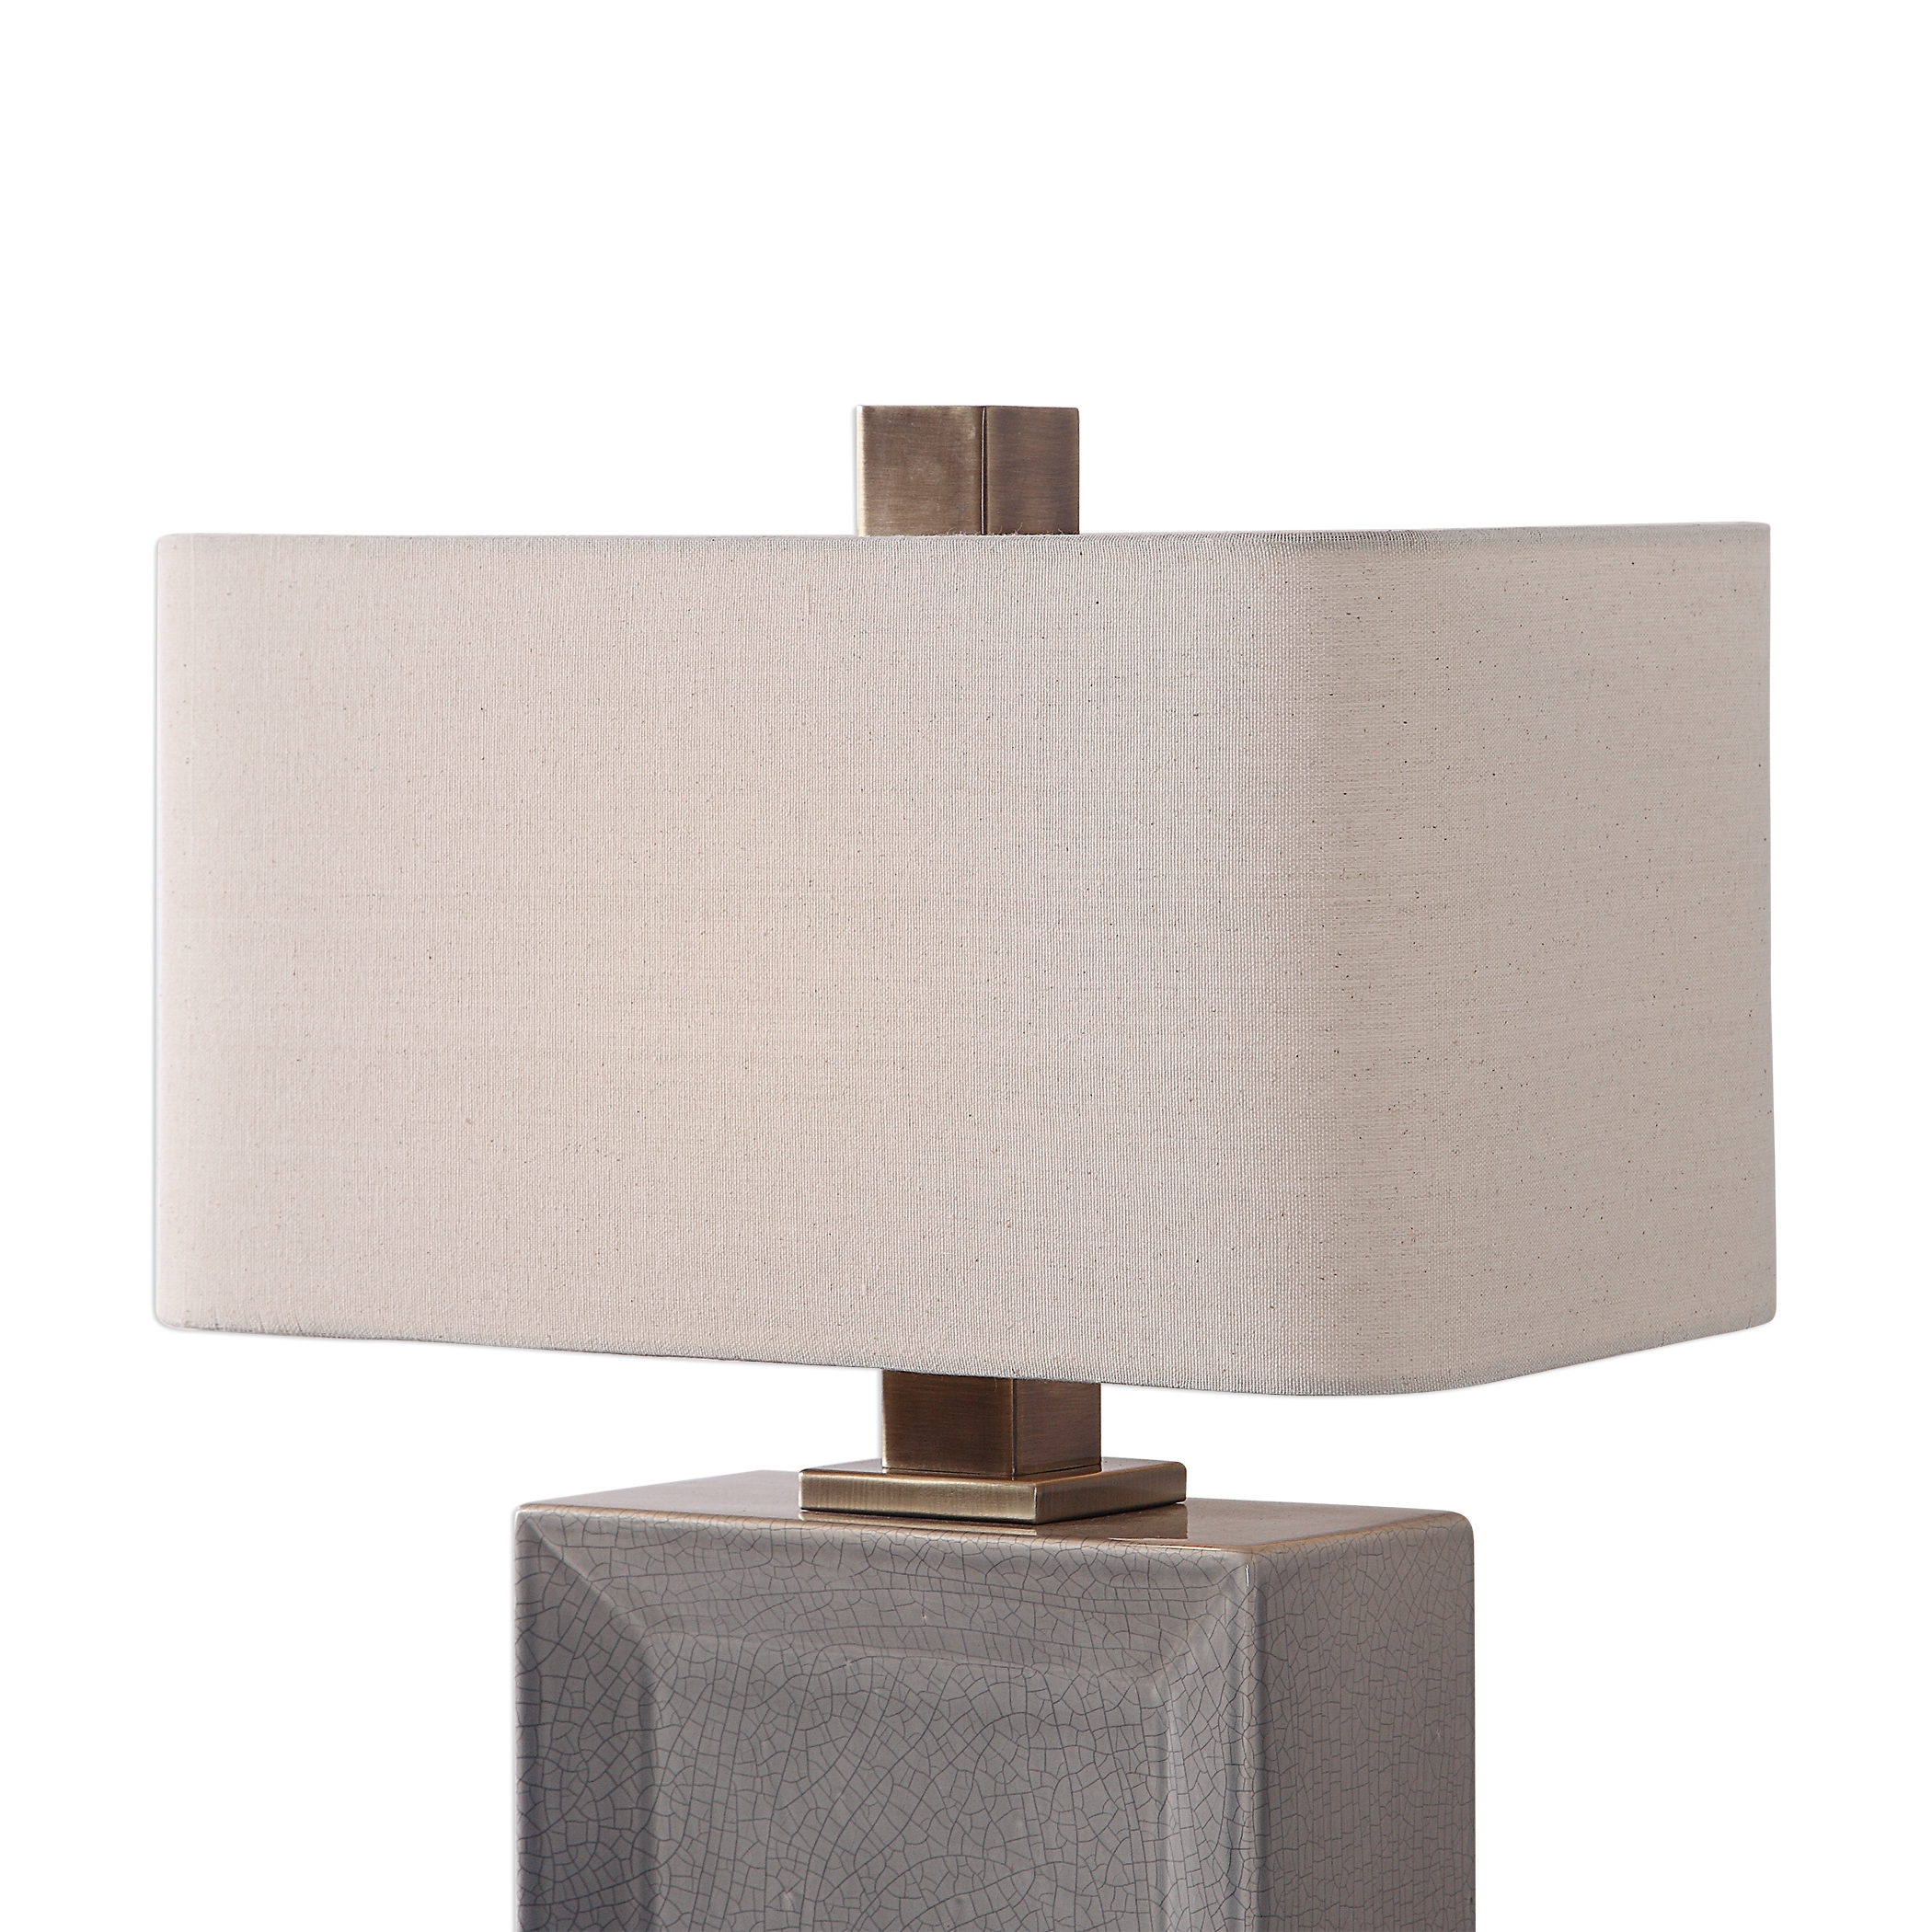 Abbot Crackled Gray Table Lamp - Image 2